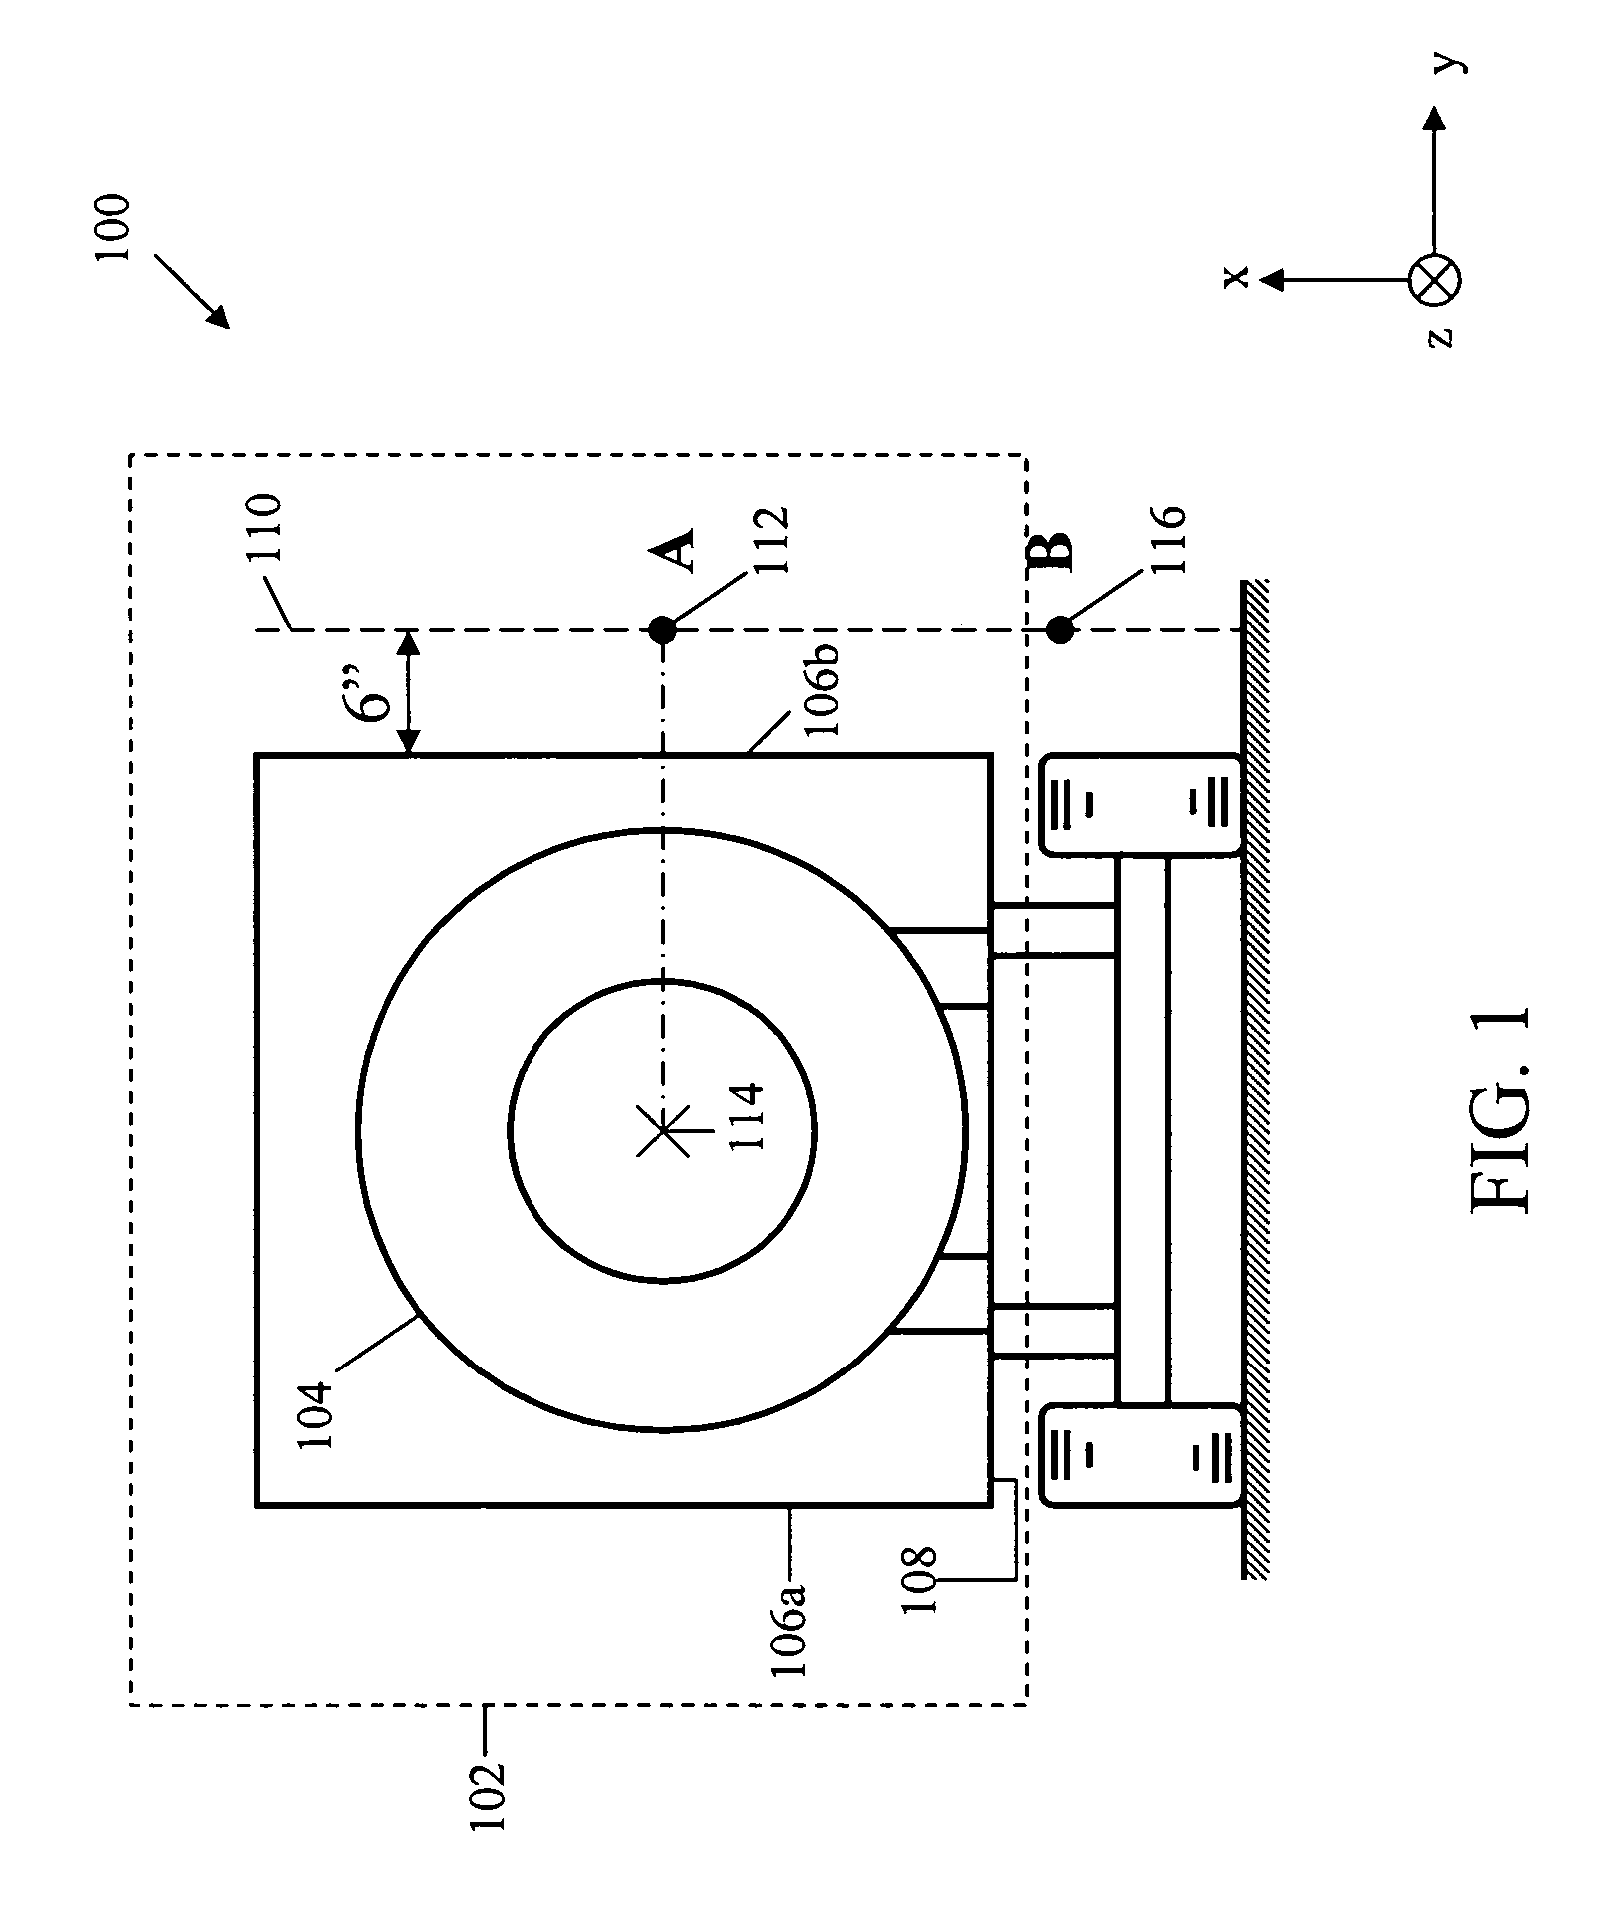 Systems and methods for passively shielding a magnetic field